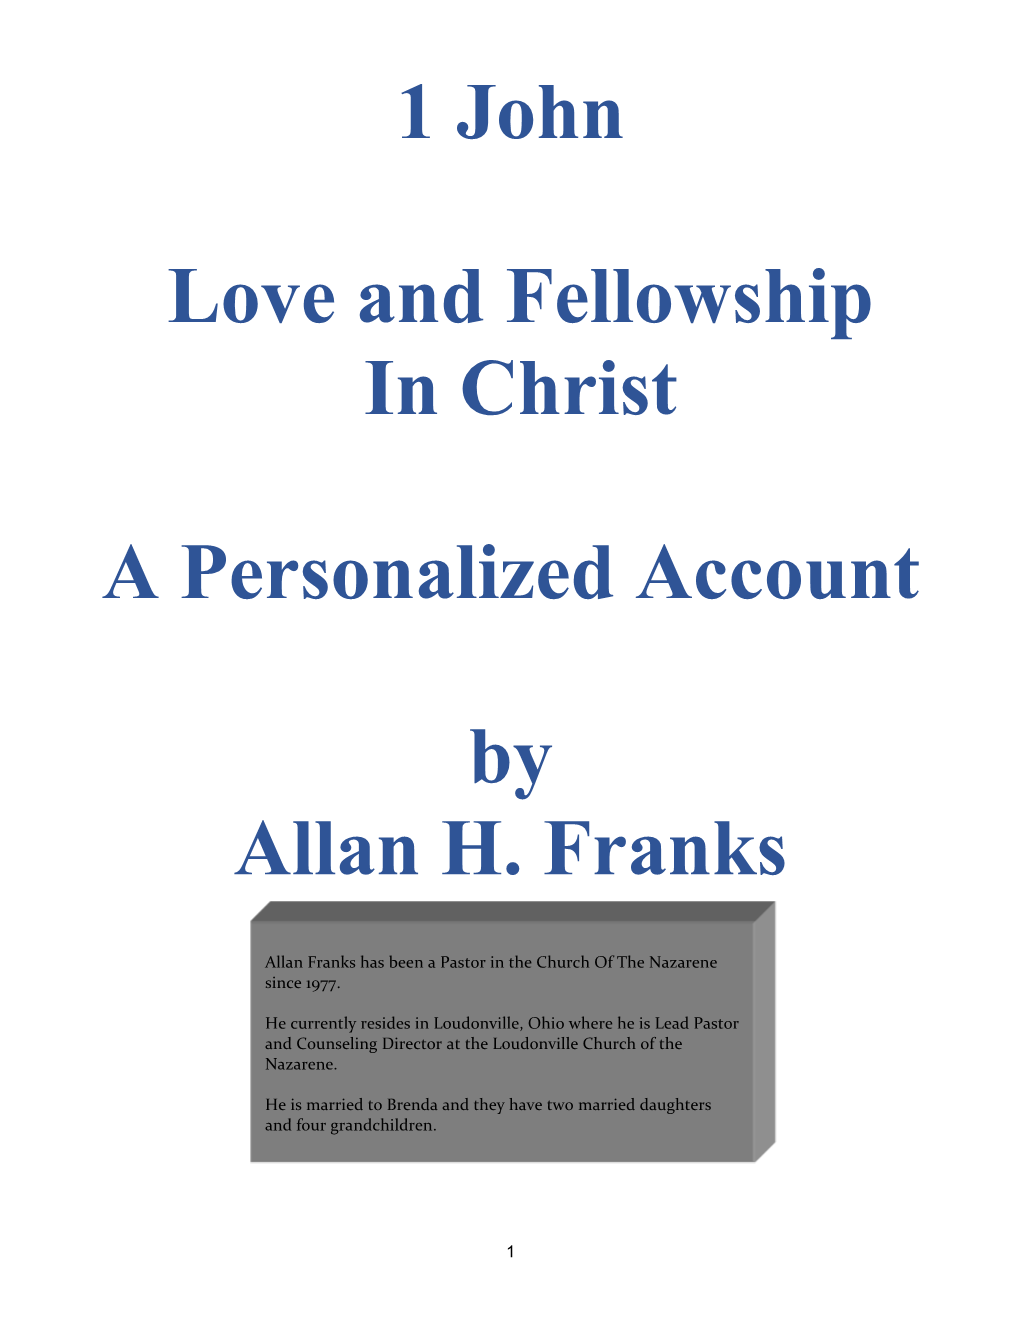 1 John Love and Fellowship in Christ a Personalized Account by Allan H